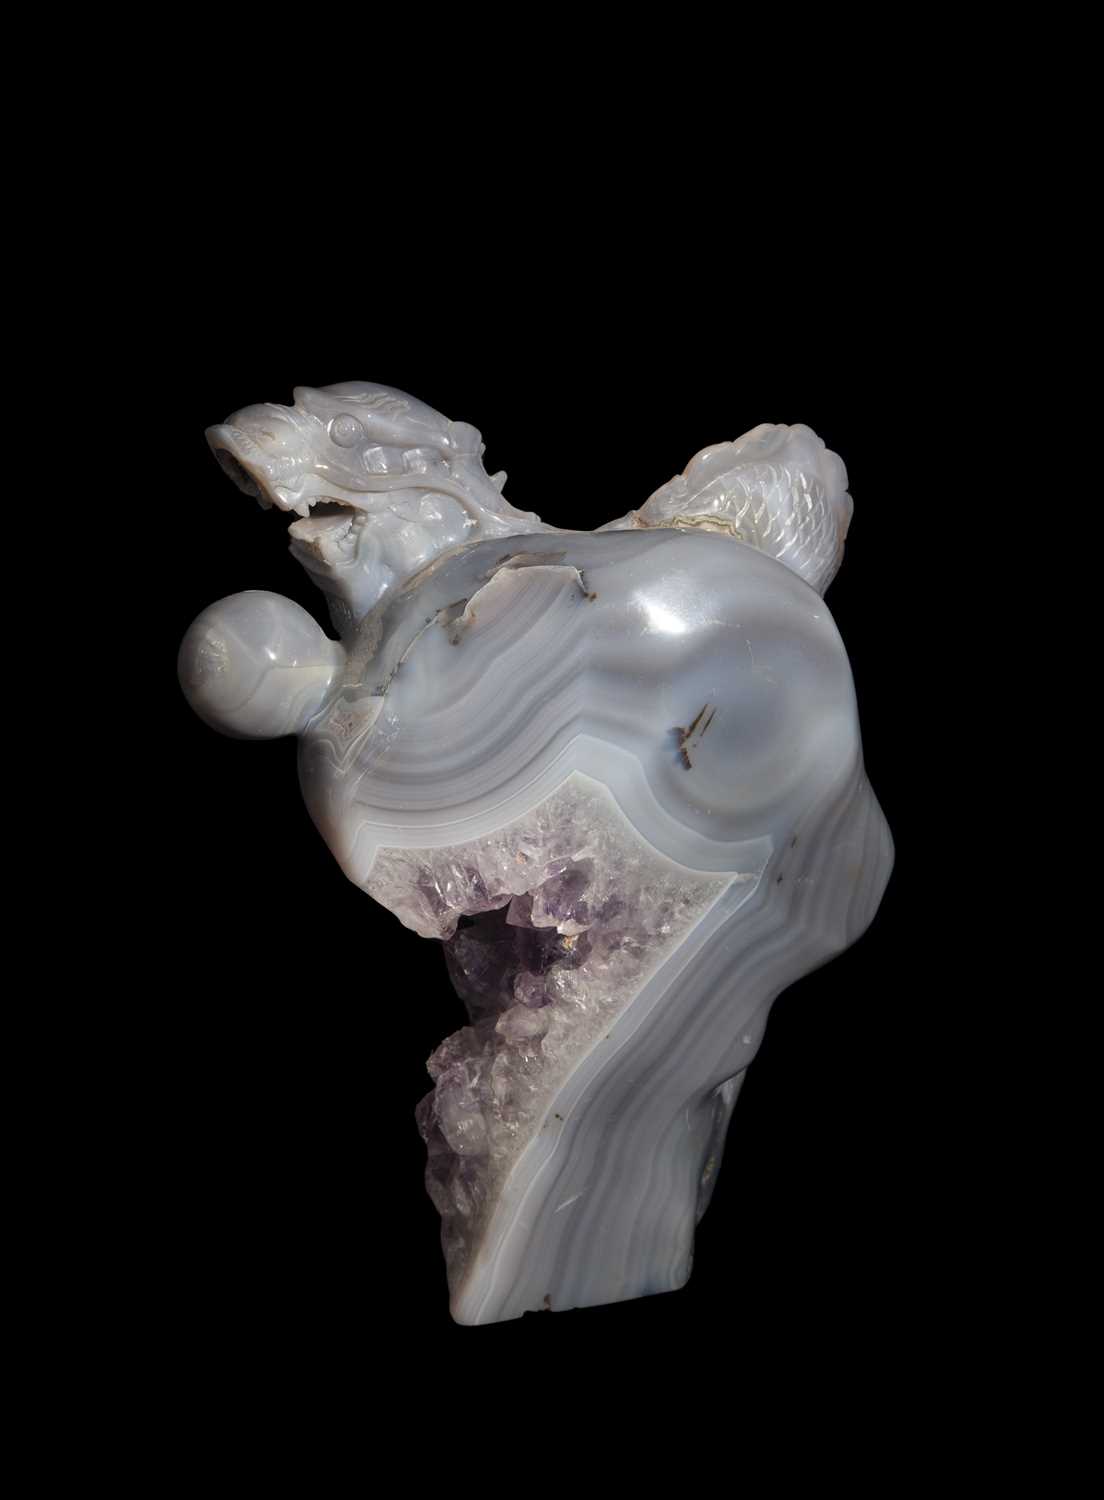 AN AGATE AND AMETHYST GEODE CARVED AS A DRAGON - Image 2 of 2